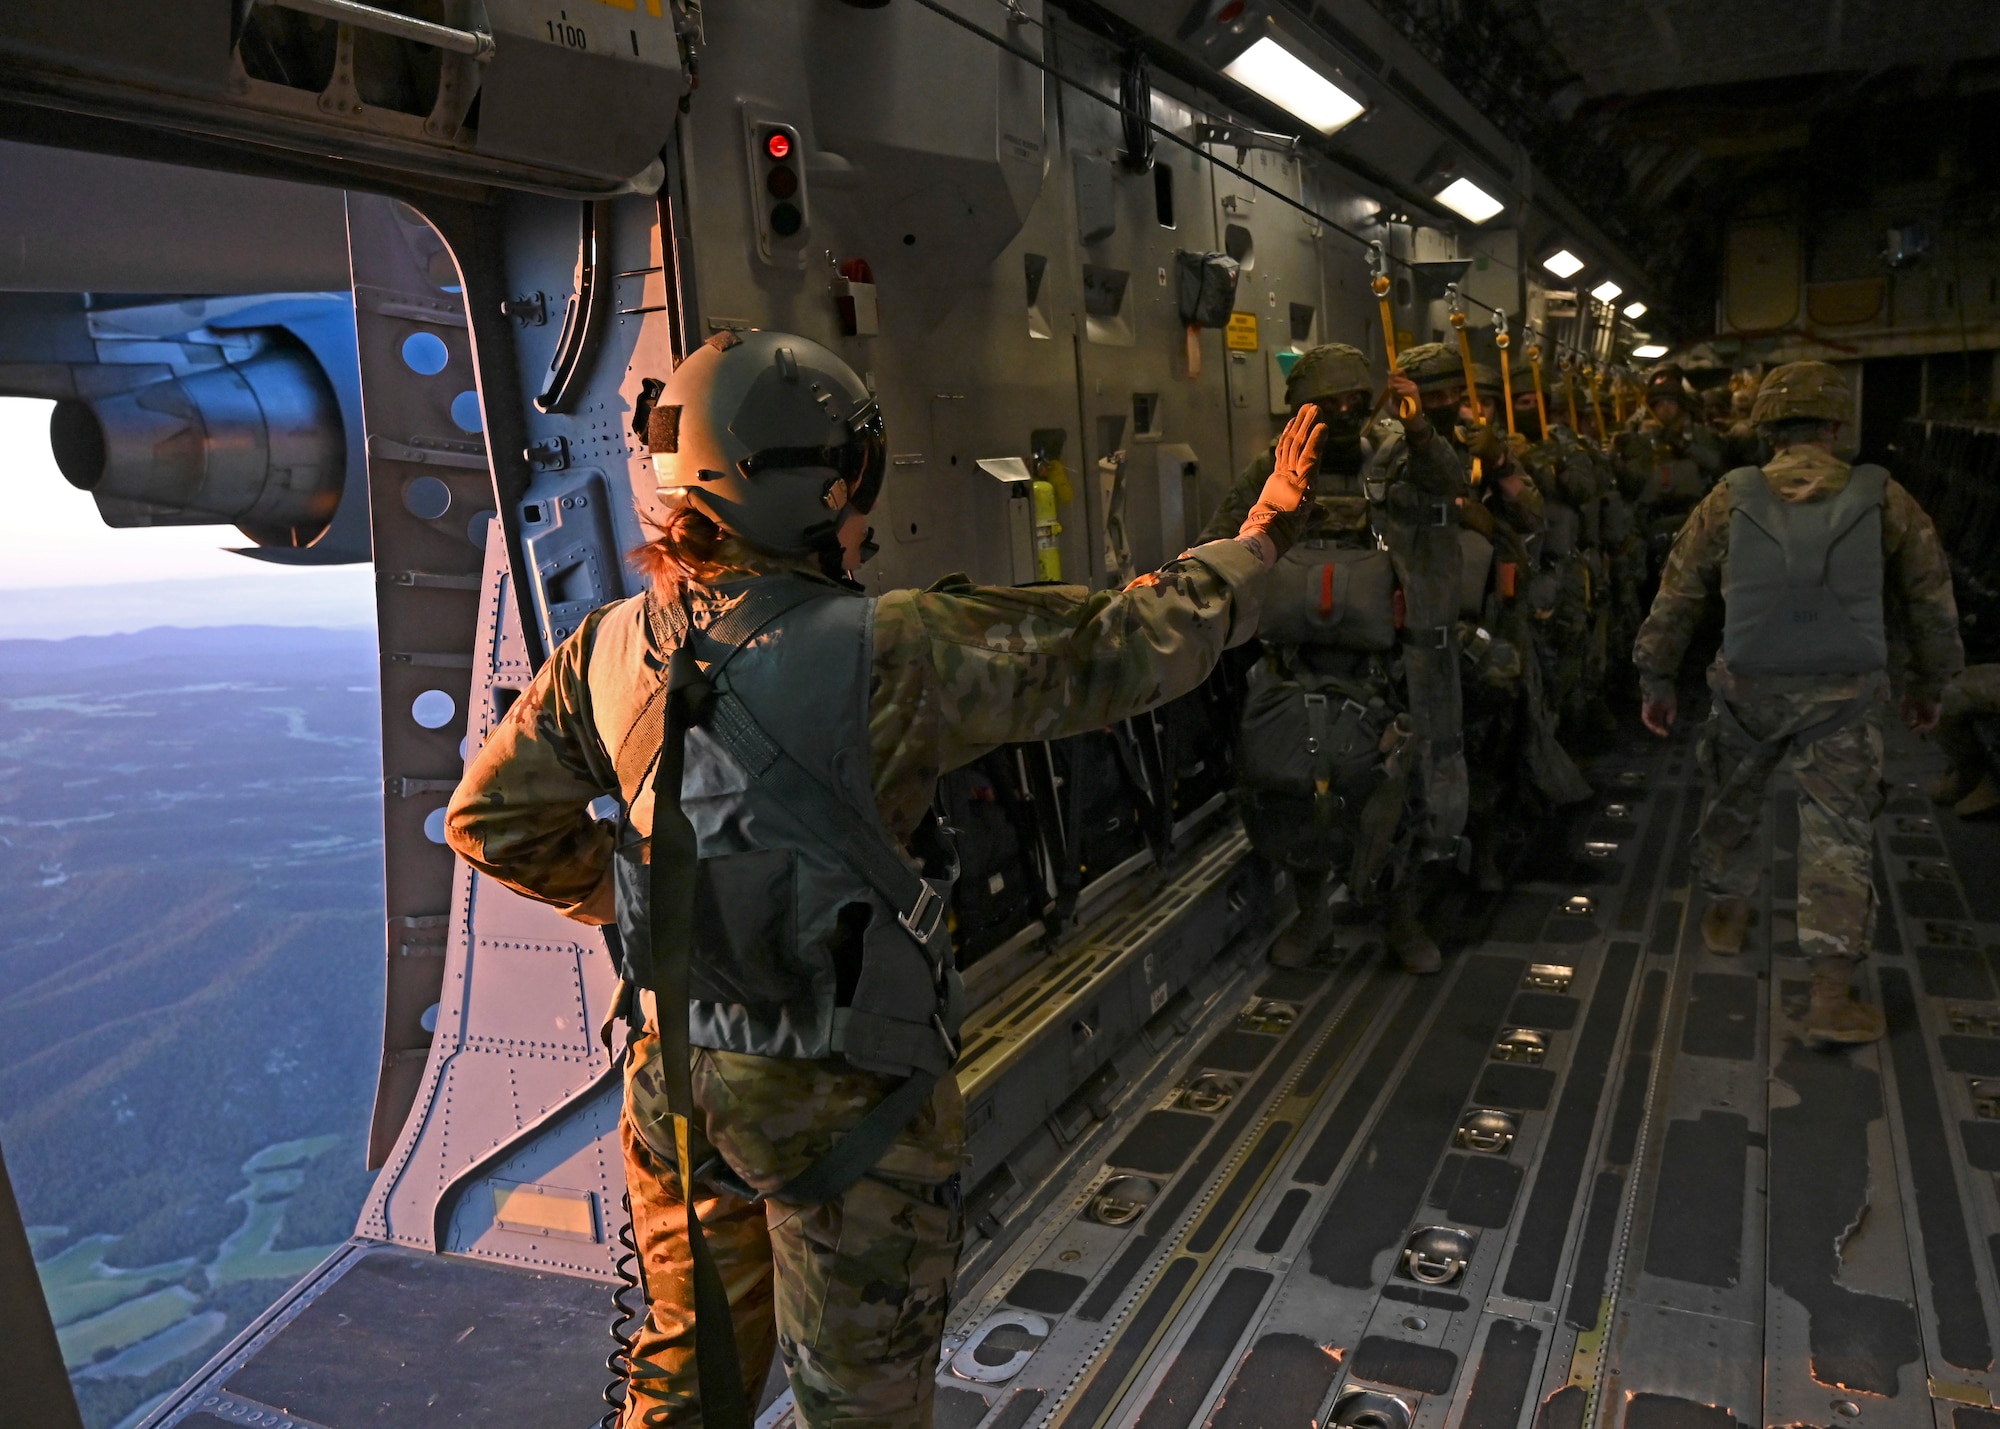 U.S Air Force Senior Airman Abby Beachnau, loadmaster with the 7th Expeditionary Airlift Squadron, gives a five-minute warning to Spanish paratroopers with the Grupo De Artilleria during DEFENDER 23 over Spain, May 10, 2023. DEFENDER 23 is a U.S. Army Europe and Africa-led exercise, supported by U.S. Air Forces in Europe – Air Forces Africa, focused on the strategic deployment of continental United States-based forces and interoperability with Allies and partners. Taking place from April 22 to June 23, DEFENDER 23 demonstrates the U.S. Air Force’s ability to aggregate U.S.-based combat power quickly in Europe; increase lethality of the NATO Alliance through the U.S. Air Force’s Agile Combat Employment; build unit readiness in a complex joint, multi-national environment; and leverage host nation capabilities to increase USAFE-AFAFRICA’s operational reach. DEFENDER 23 includes more than 7,800 U.S. and 15,000 multi-national service members from various Allied and partner nations. (U.S Air Force photo by Senior Airman Callie Norton)